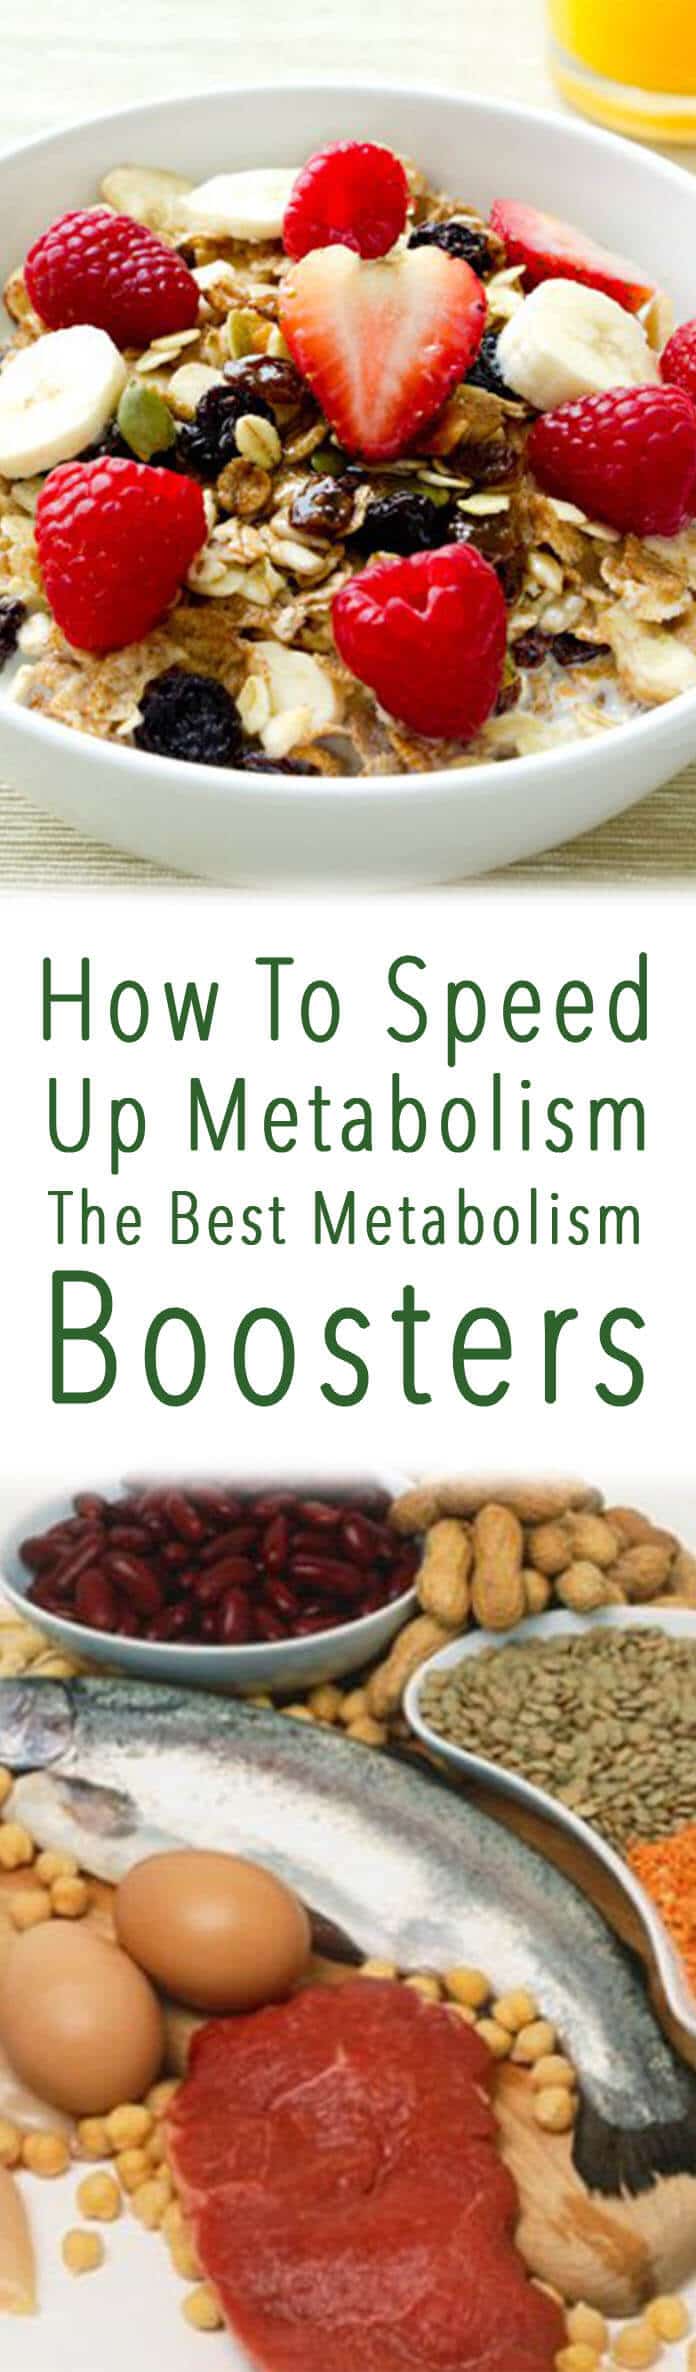 Check out these metabolism boosters and how effective they are!